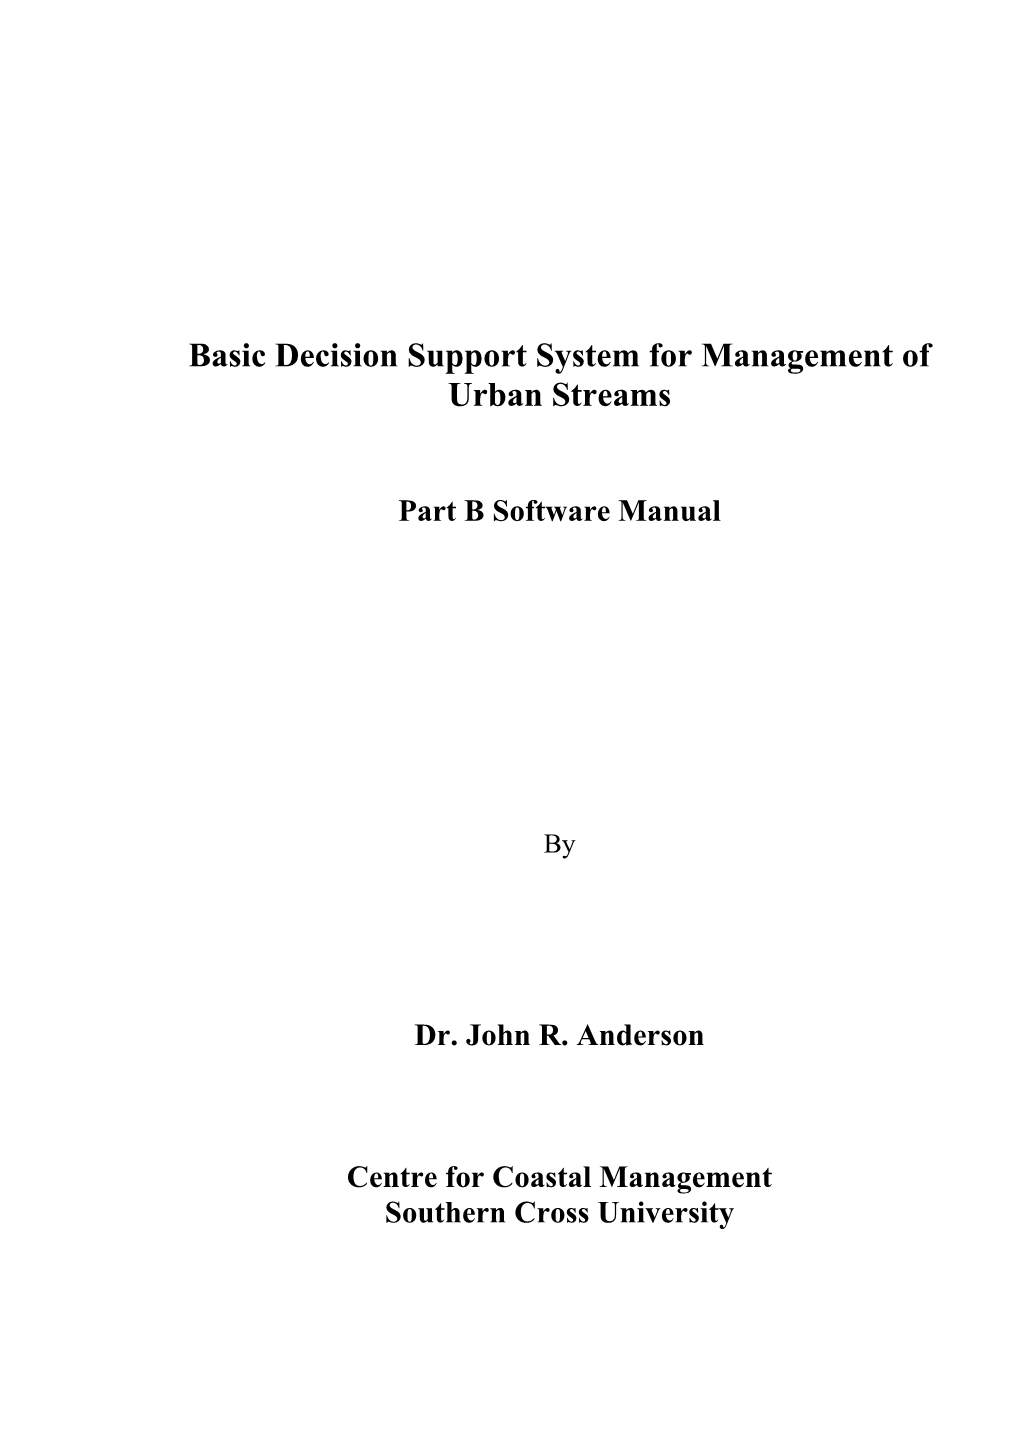 Basic Decision Support System for Management of Urban Streams